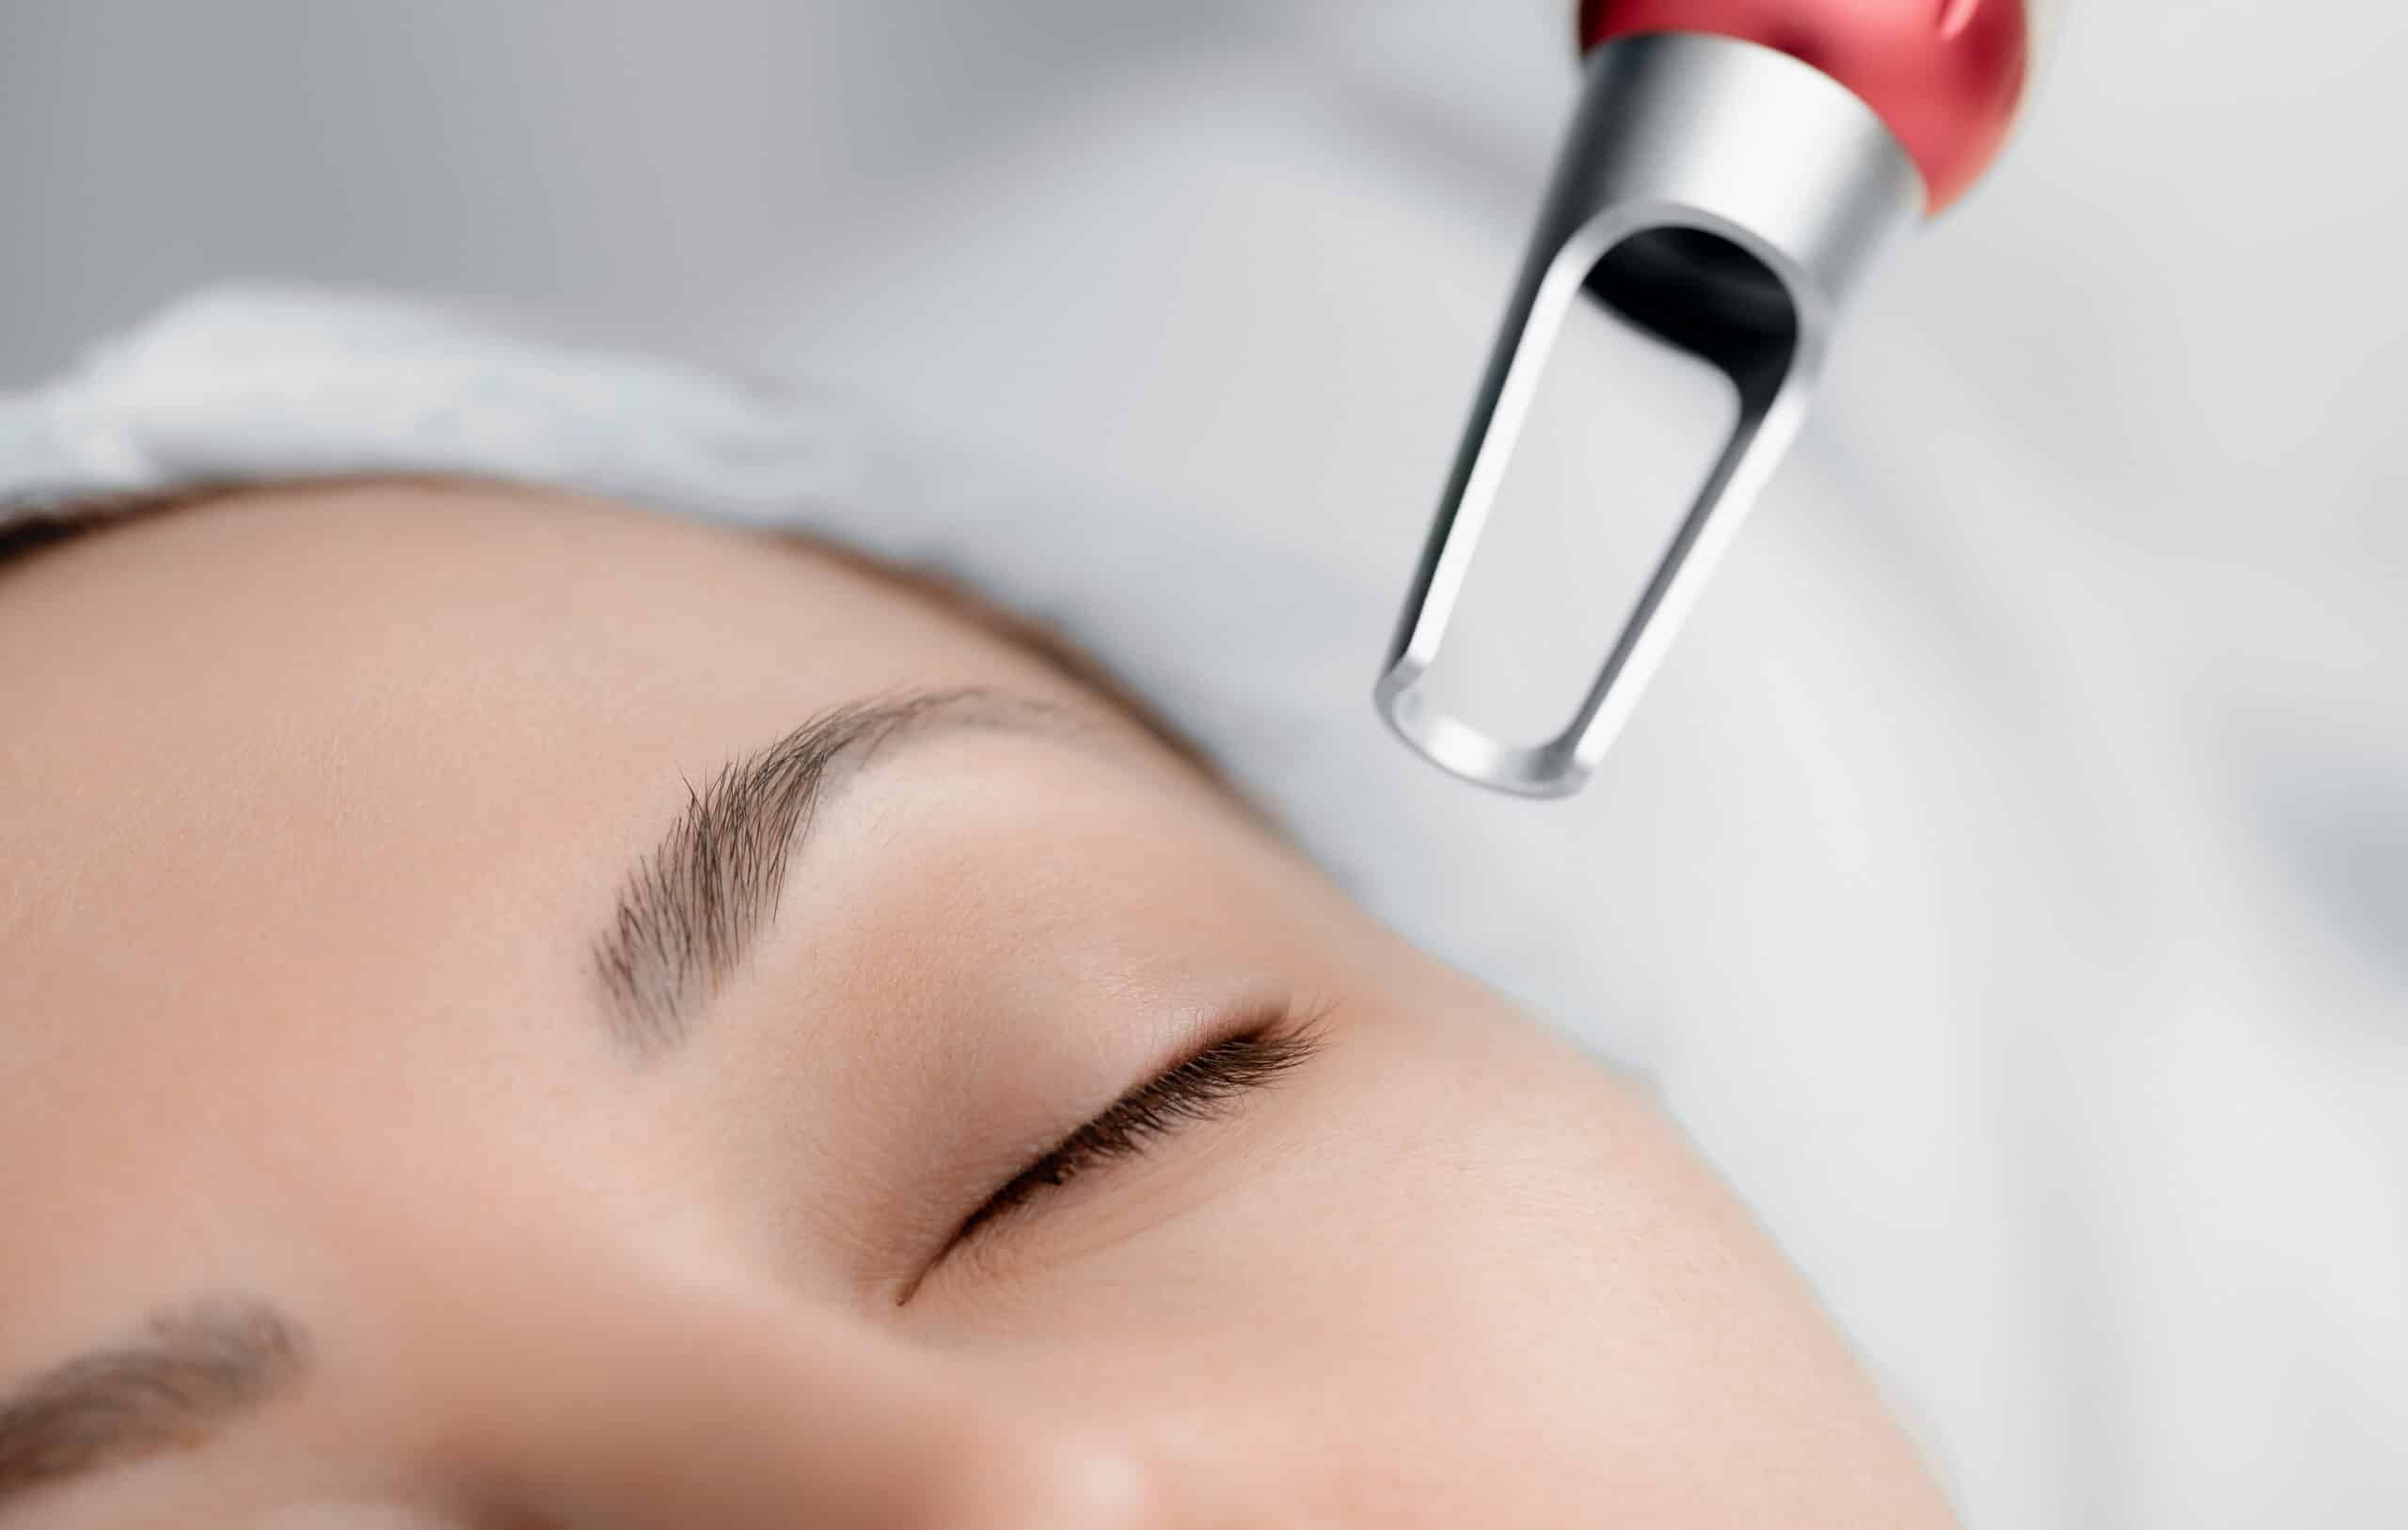 Pico Laser Benefits: The New Age in Skin Treatment Technology